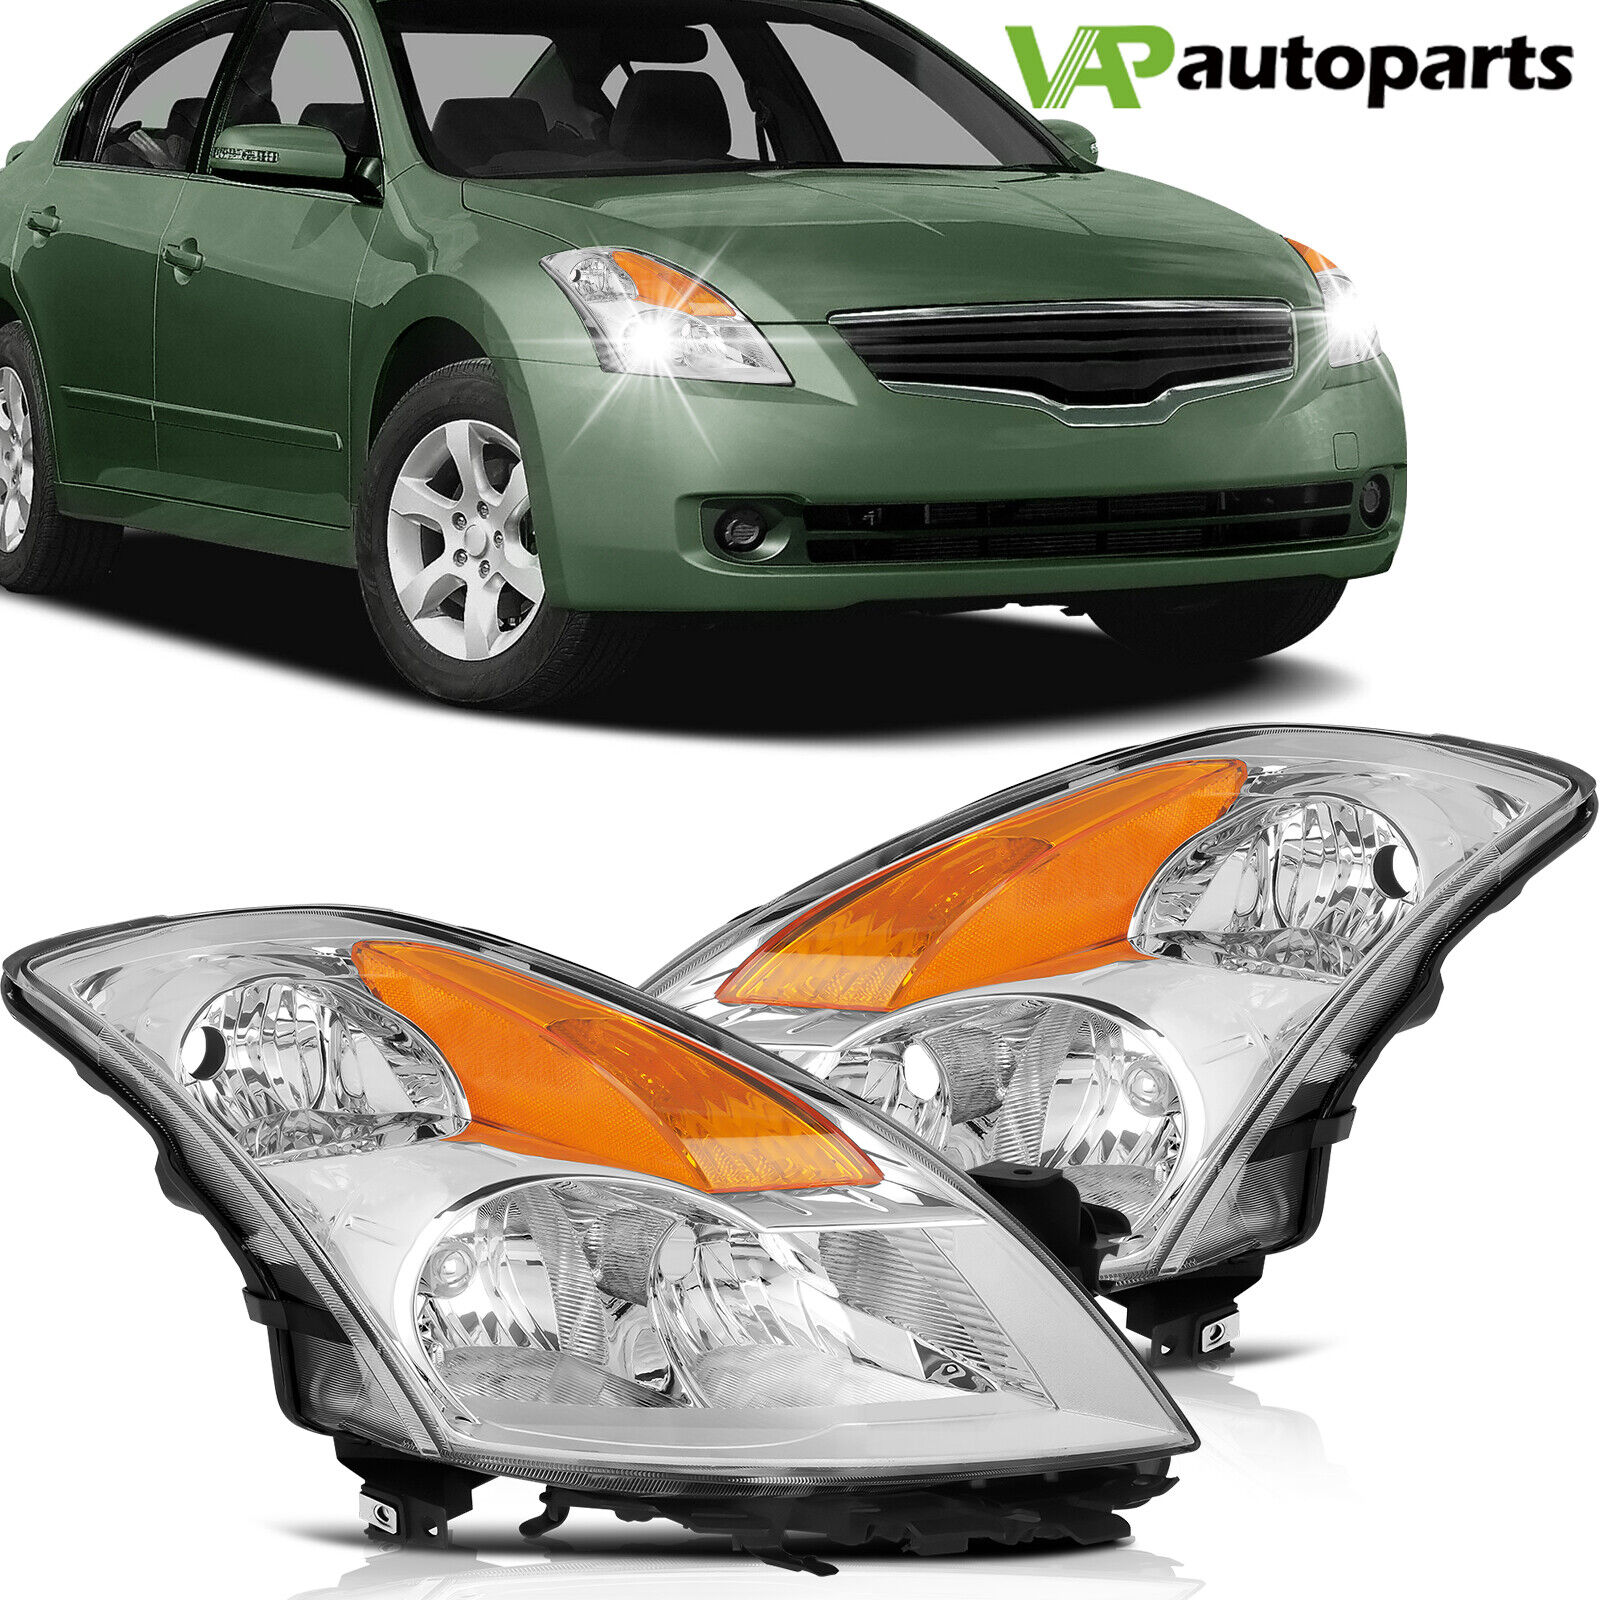 For Nissan Altima 4dr 2007-2009 Driver & Passenger Sides Headlight Assembly Pair